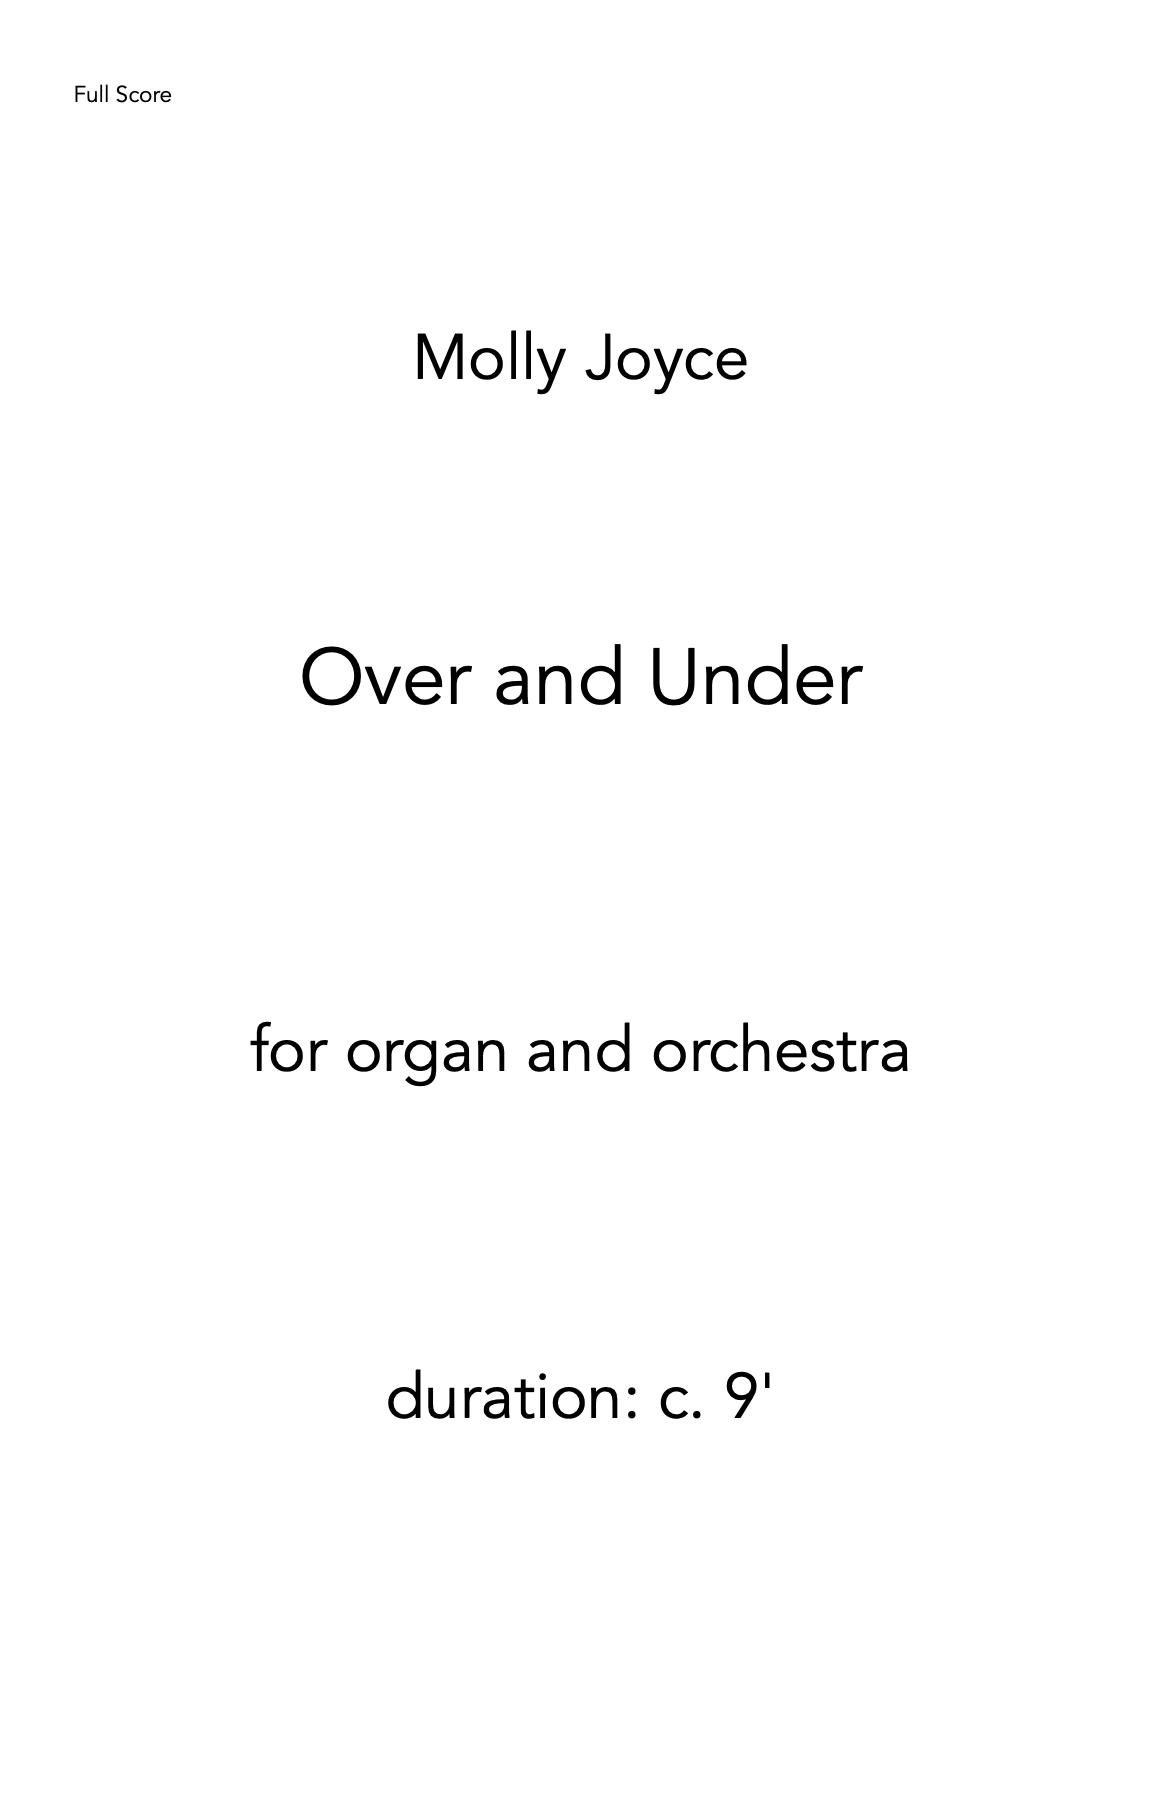 Over And Under by Molly Joyce